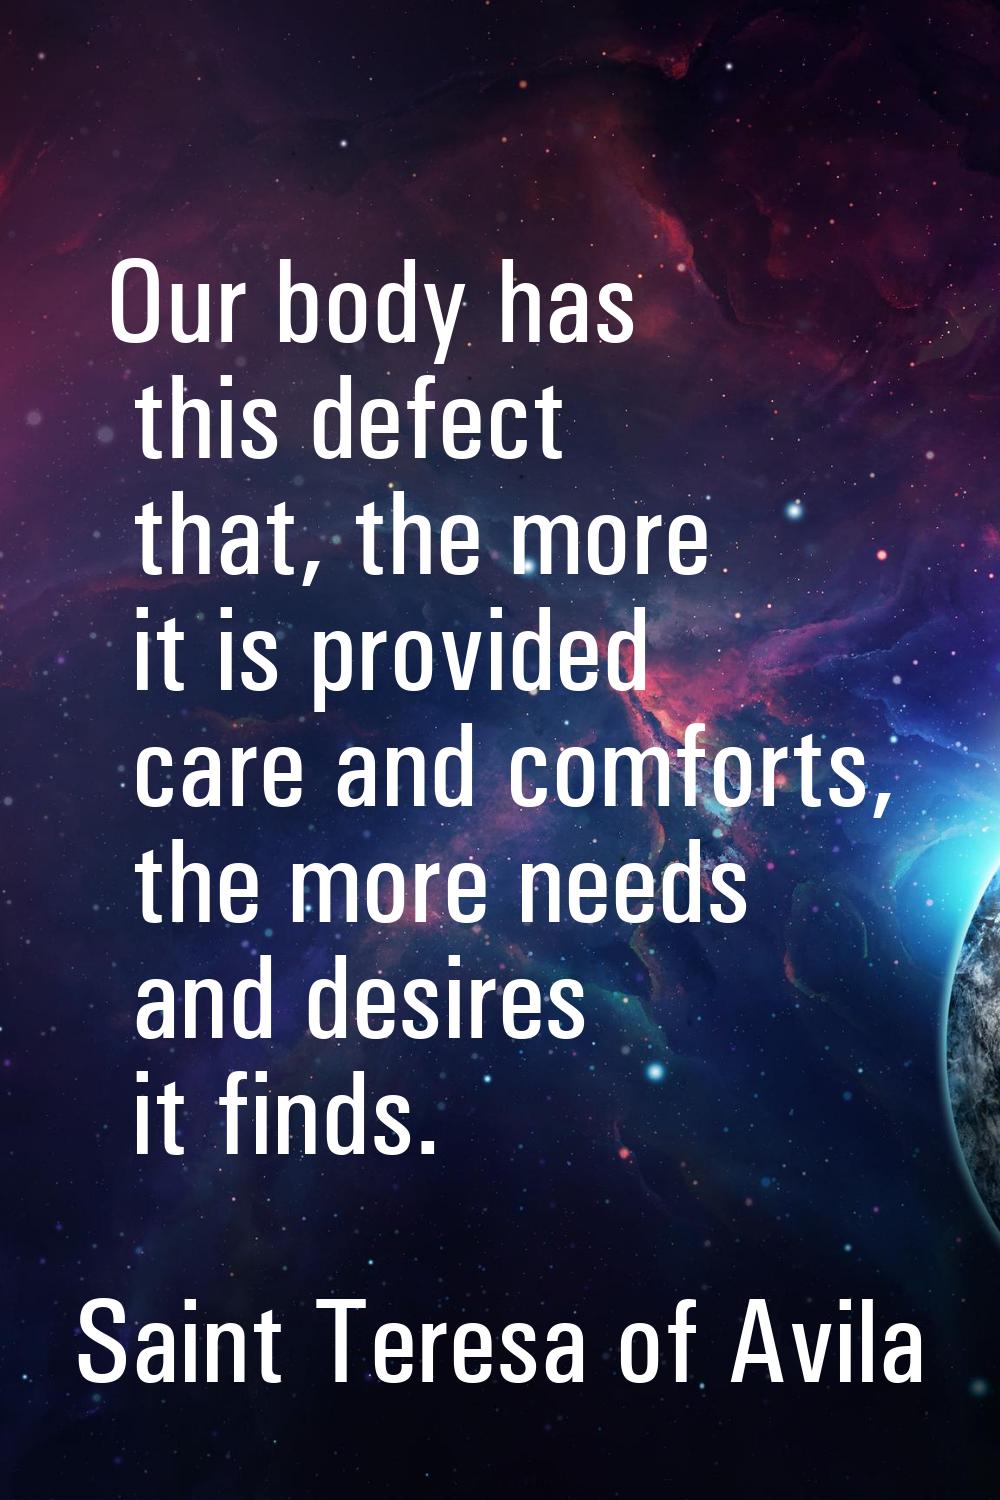 Our body has this defect that, the more it is provided care and comforts, the more needs and desire